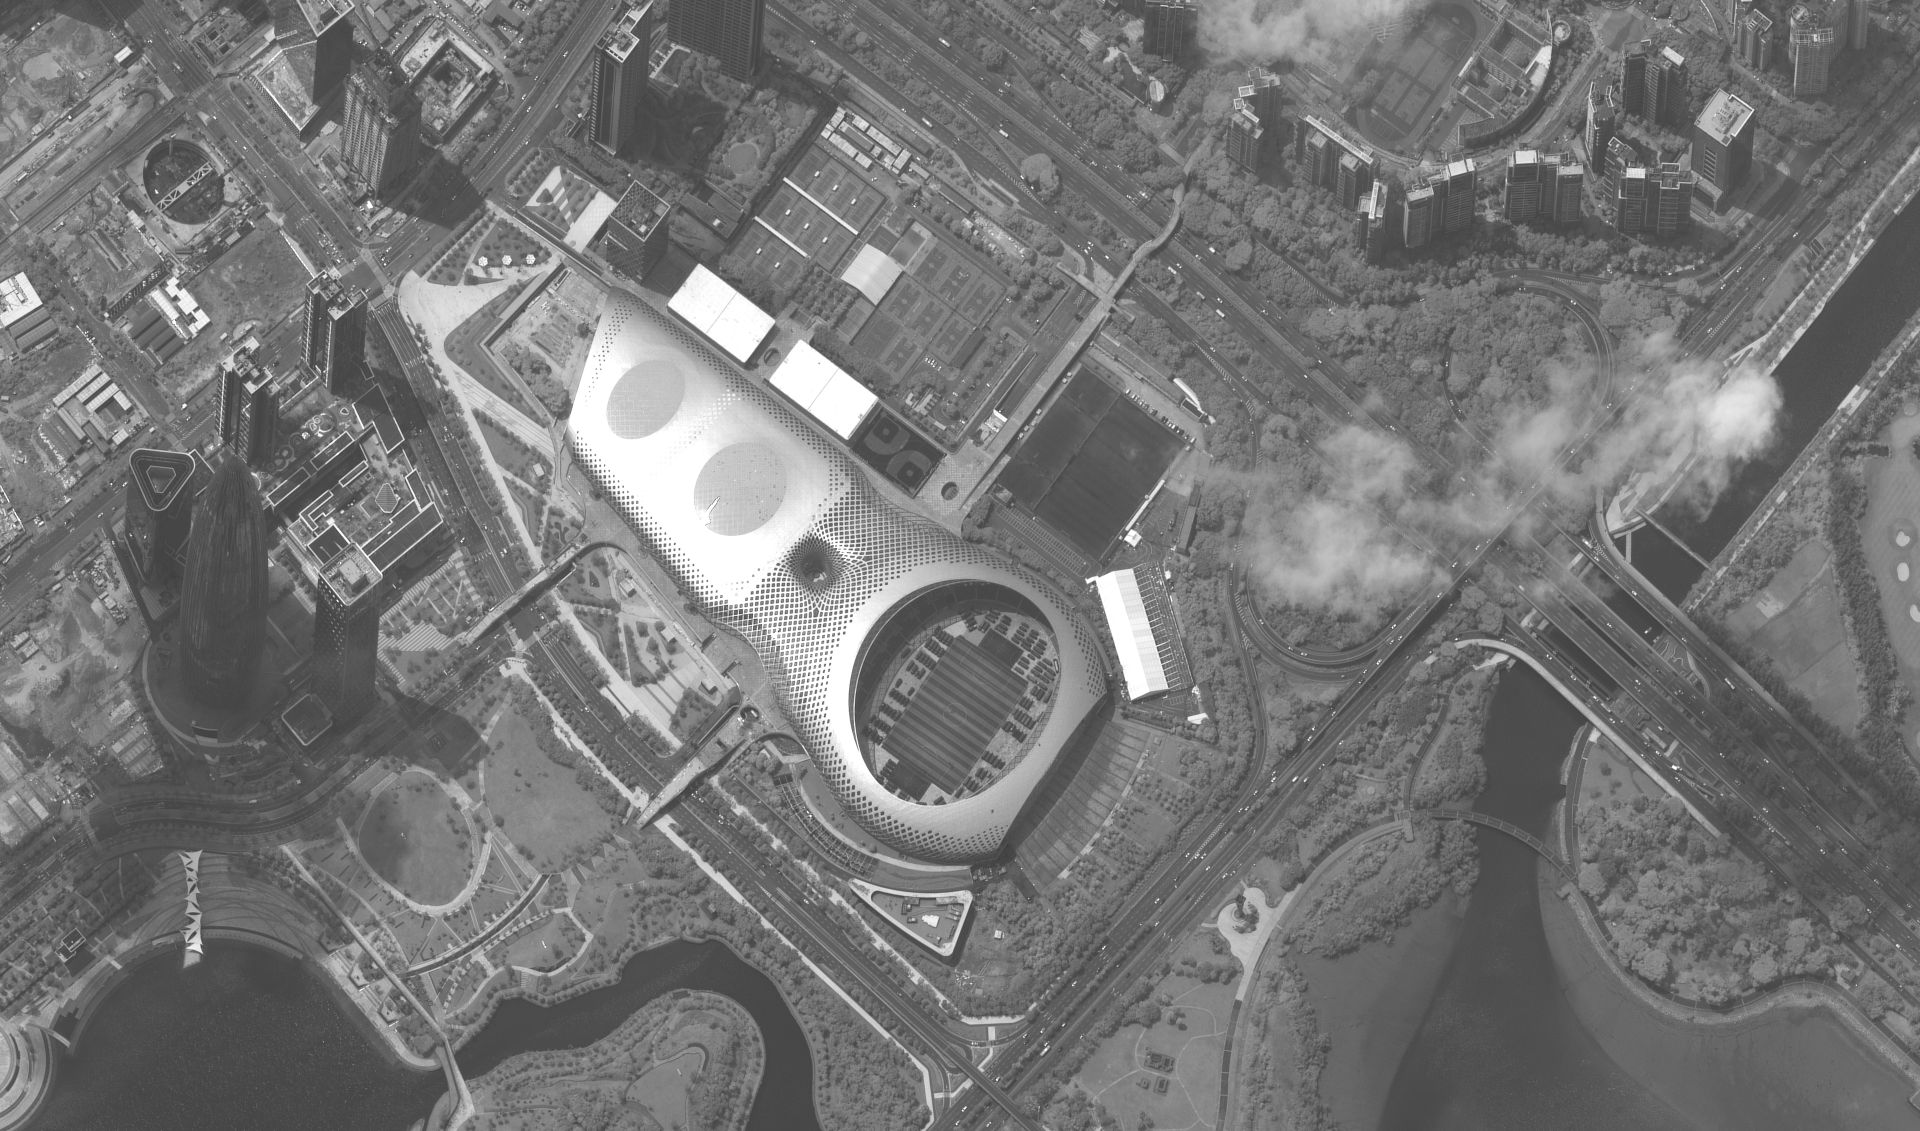 epa07772212 A handout satellite image made available by Maxar Technologies shows military and security vehicles parked in the Shenzhen Bay Sports Center, in Shenzhen, China, 12 August 2019 (issued 14 August 2019). According to media reports, military and security vehicles from the People's Armed Police have gathered in Shenzhen, a city in southeastern China which borders Hong Kong. The special administrative region of Hong Kong has been gripped for weeks by mass protests, which began in June 2019 over a now-suspended extradition bill and have developed into an anti-government movement.  EPA/SATELLITE IMAGE ©2019 MAXAR TECHNOLOGIES / HANDOUT MANDATORY CREDIT: SATELLITE IMAGE ©2019 MAXAR TECHNOLOGIES - The watermark may not be removed/cropped HANDOUT EDITORIAL USE ONLY/NO SALES